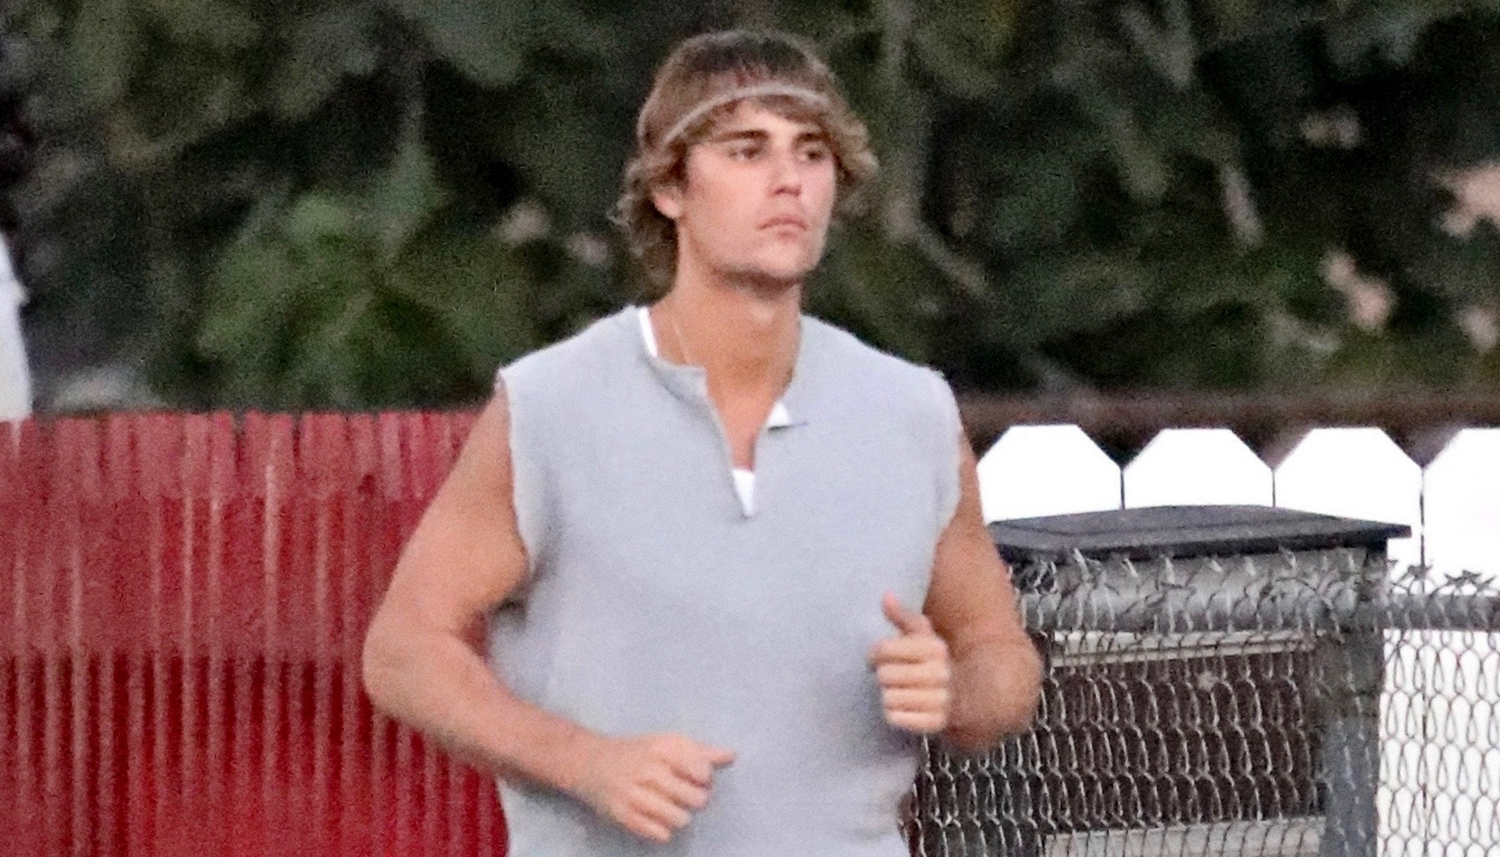 Justin Bieber Covers His Tattoos to Play Rocky Balboa in New Music Video – See Set Photos!